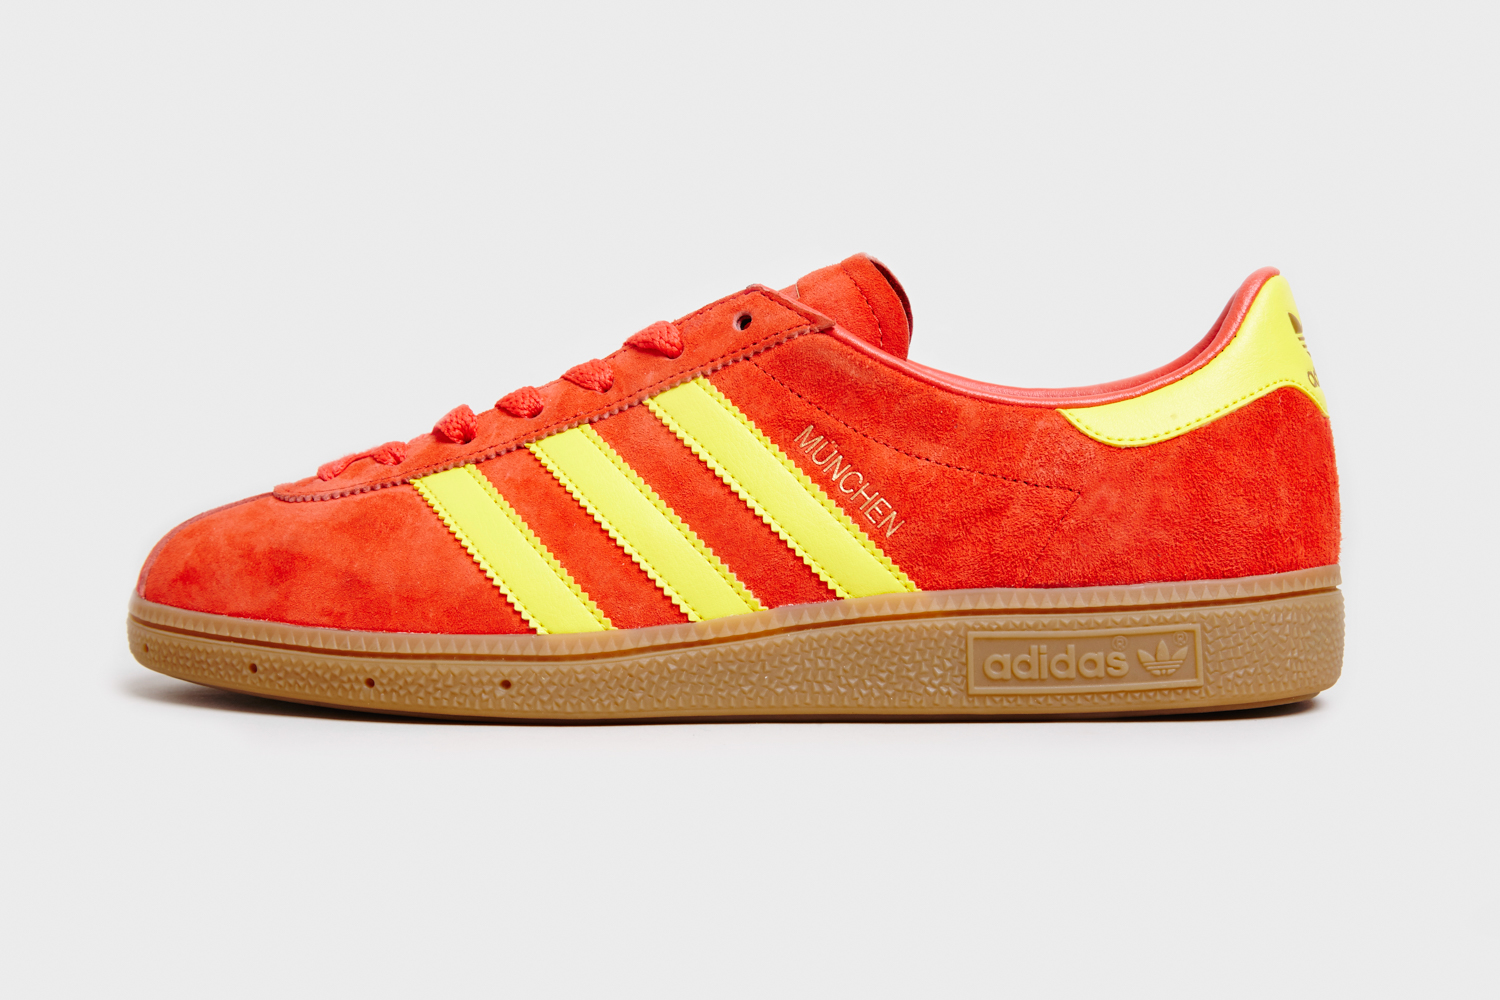 Reorganizar Aumentar Patatas Red And Yellow Adidas Trainers Deals, SAVE 43% - aveclumiere.com